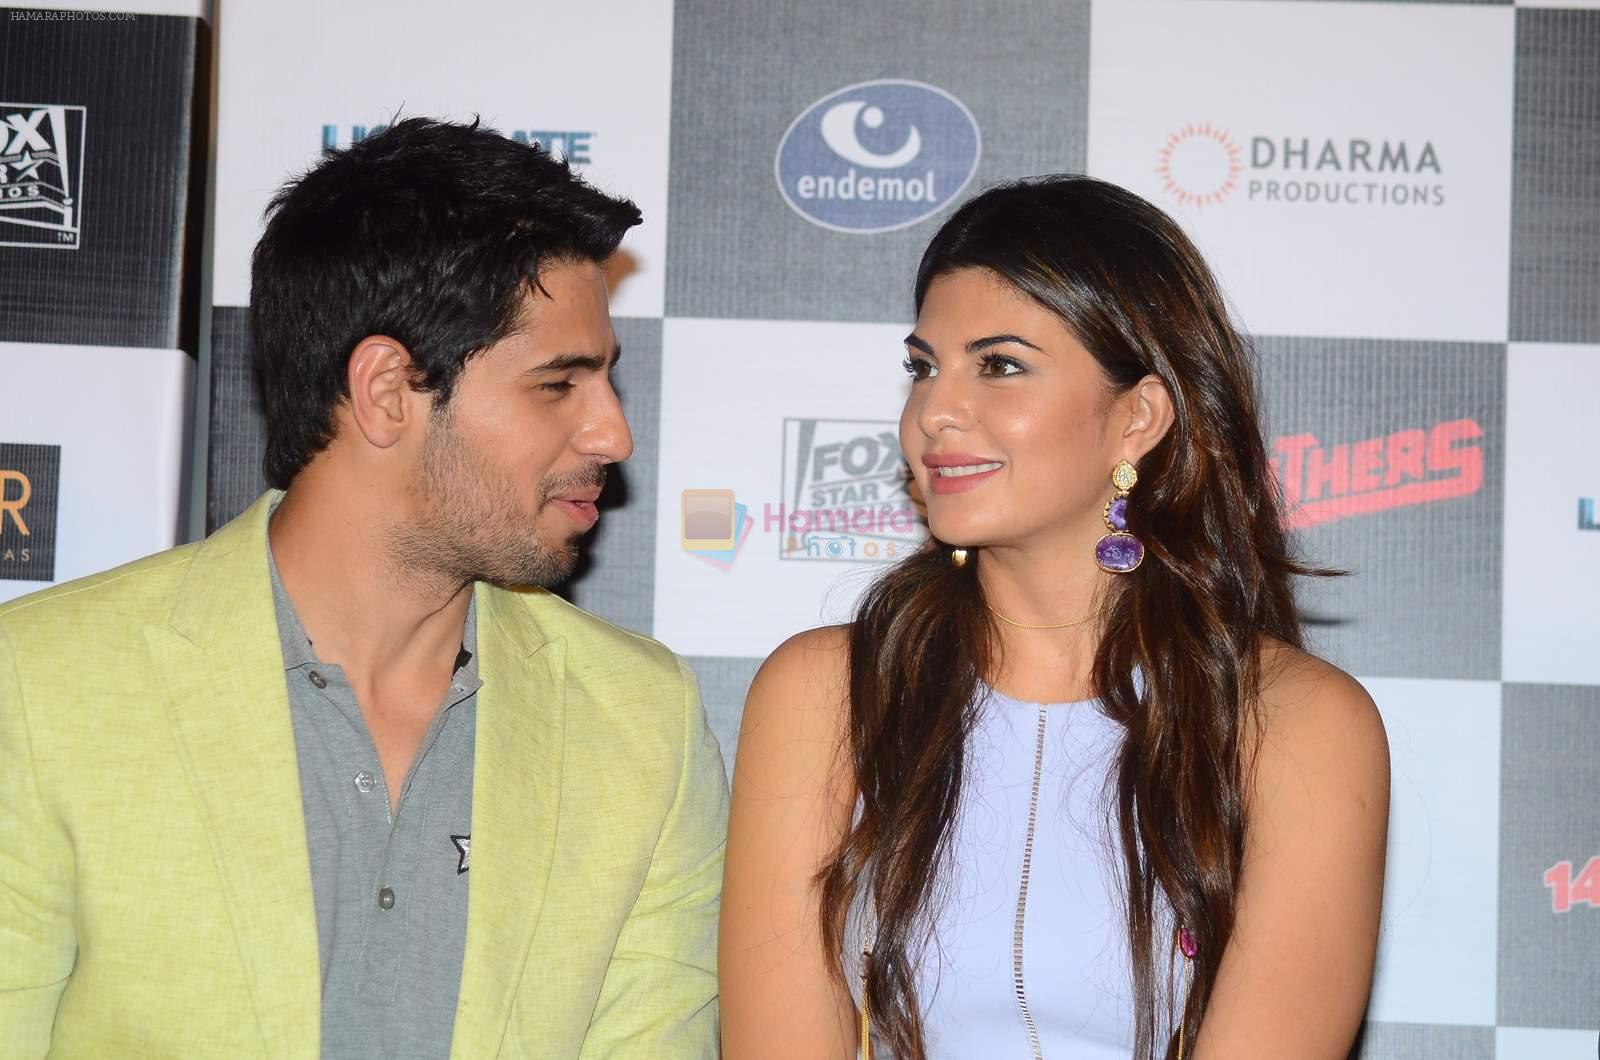 Jacqueline Fernandez, Sidharth Malhotra at Brothers trailor launch in Mumbai on 10th June 2015